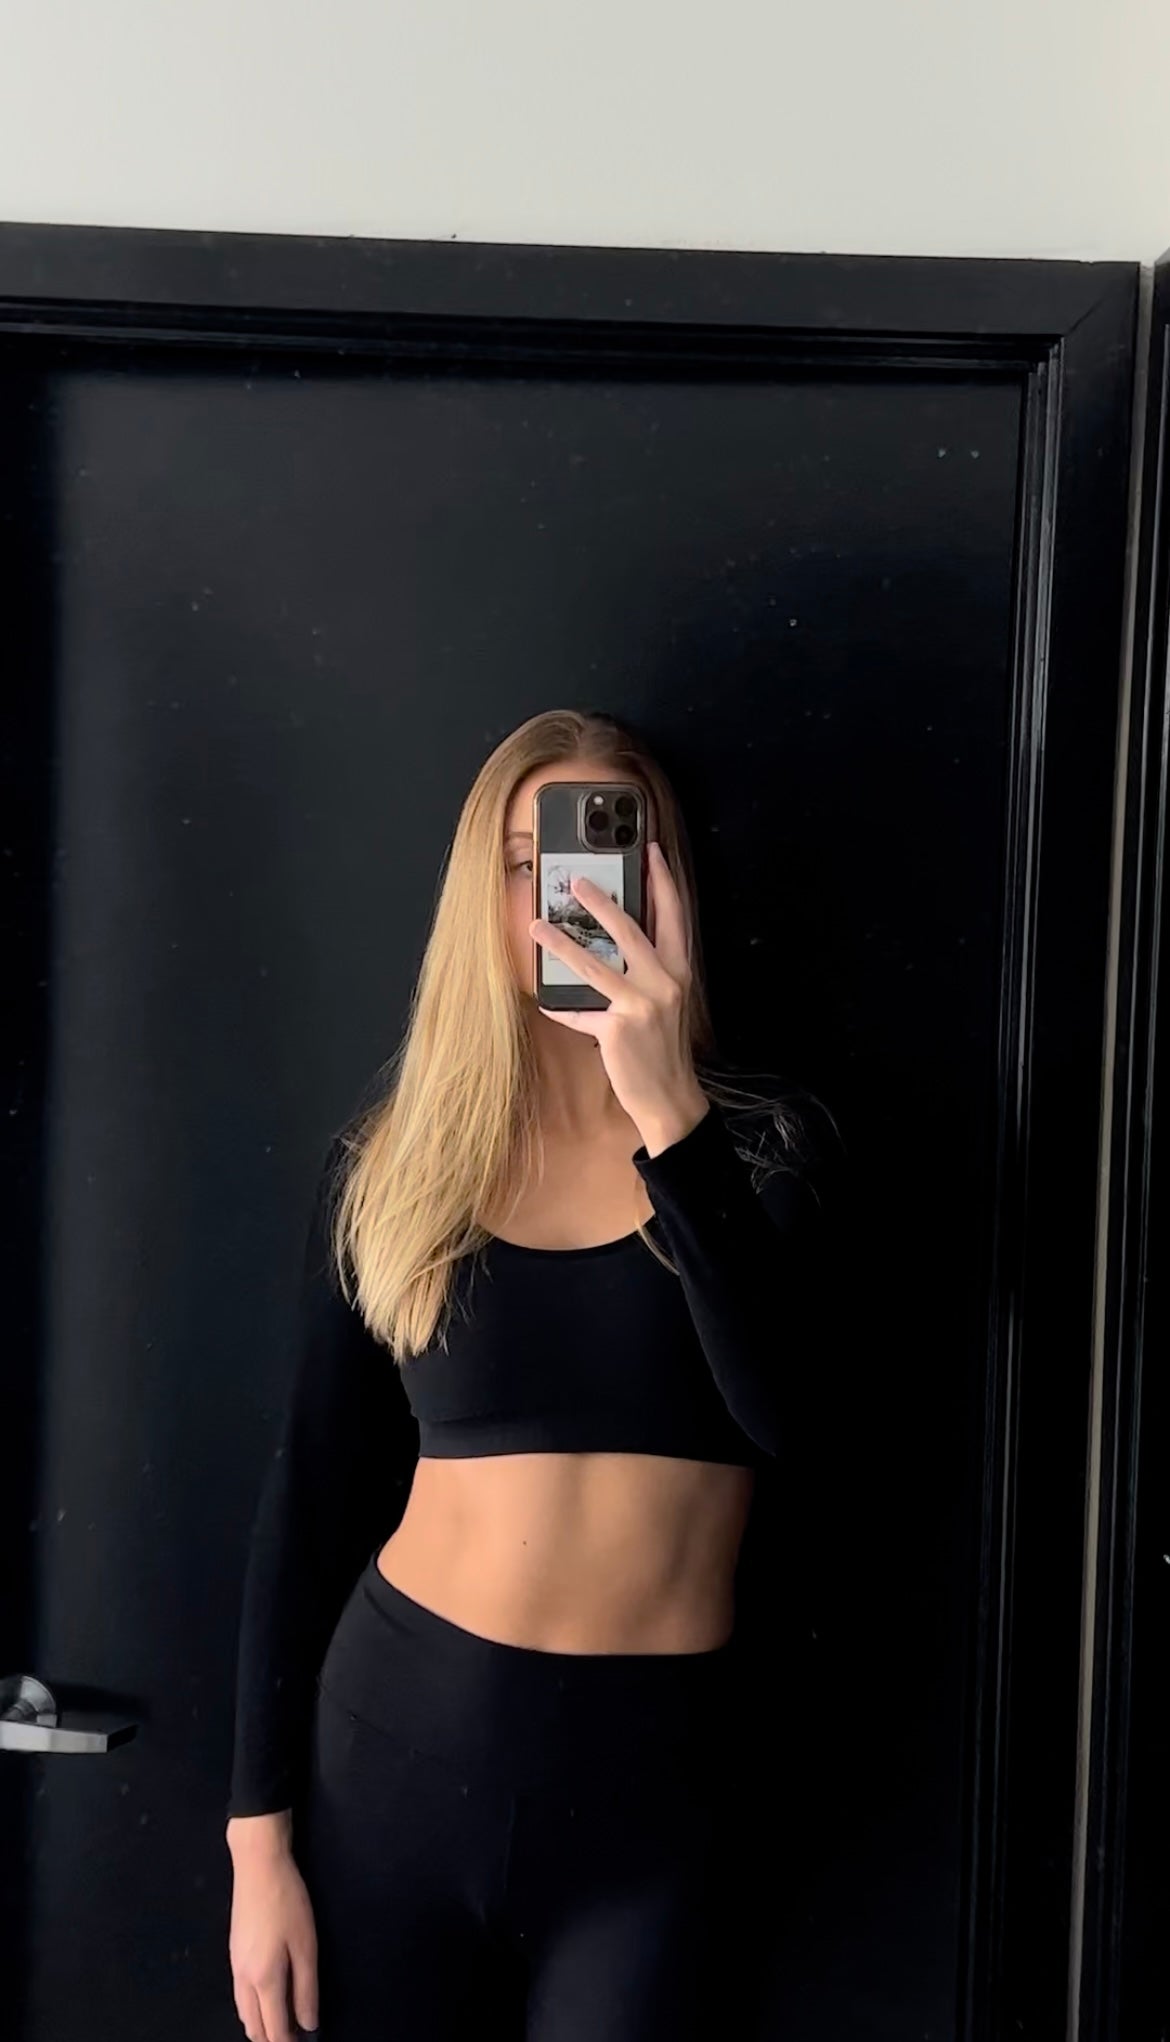 Girl posing in a mirror wearing activewear clothes and showing her abs/core. 